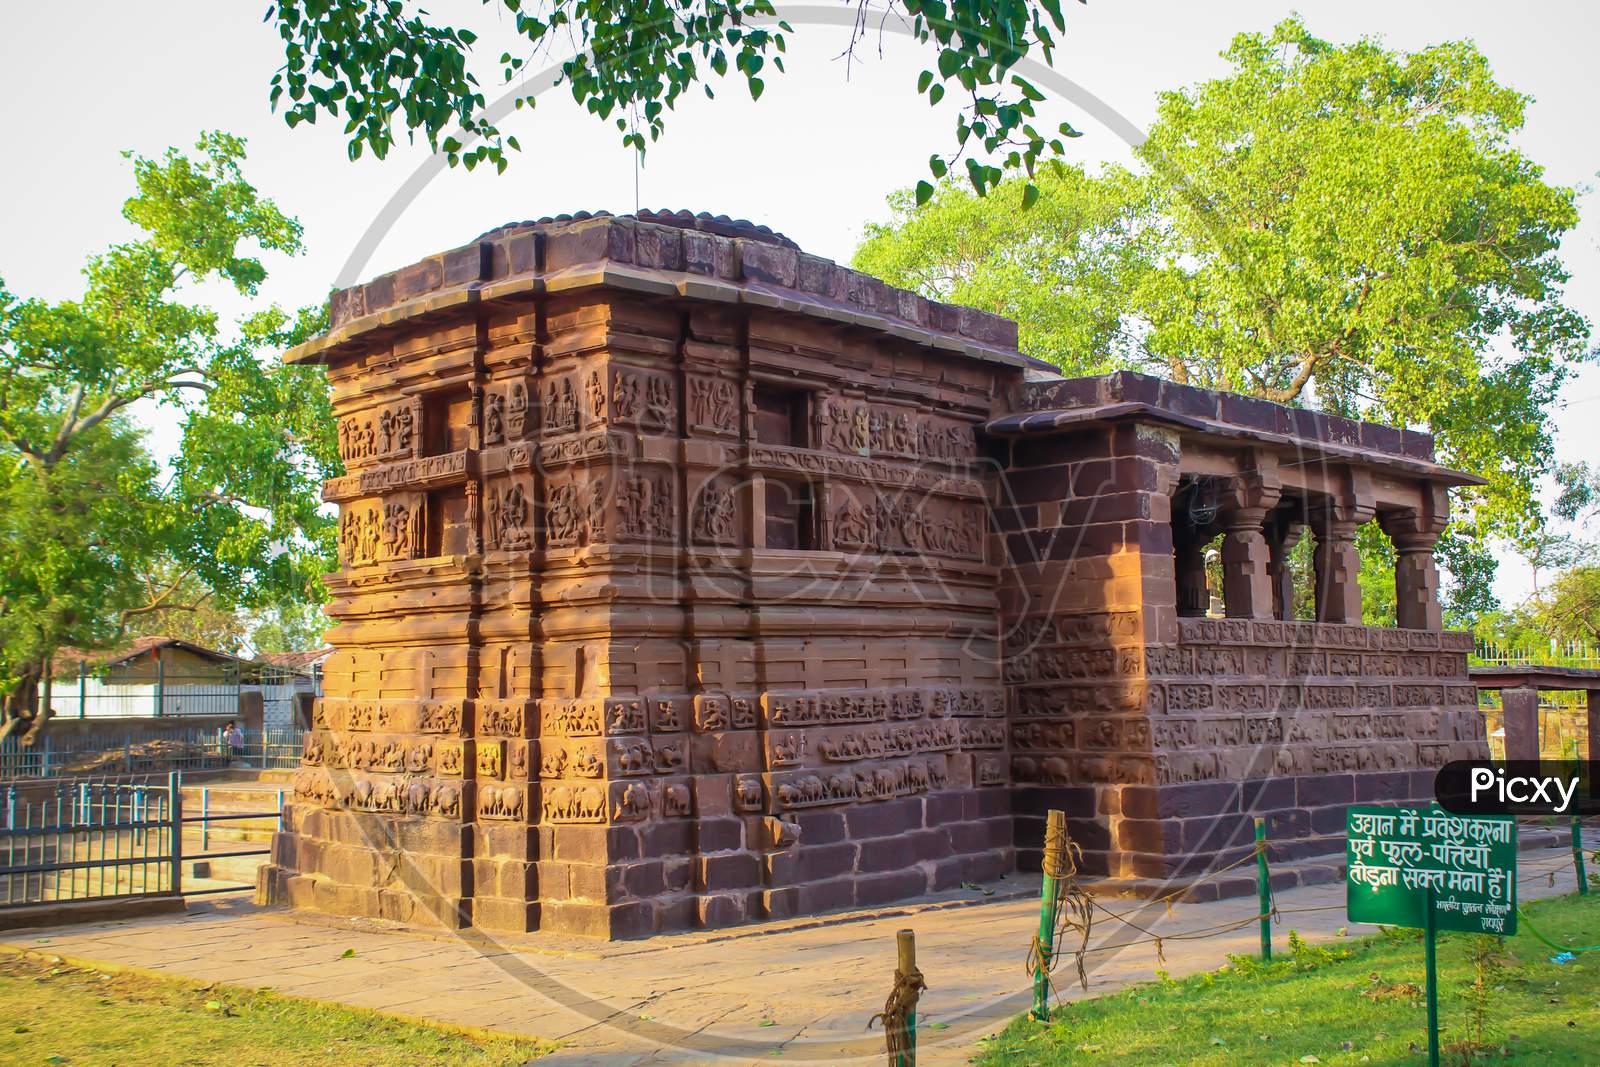 Exterior View Of Shiva Temple At Dev Baloda. Situated In The District Of Bhilai, Chattisgarh Tourism, India